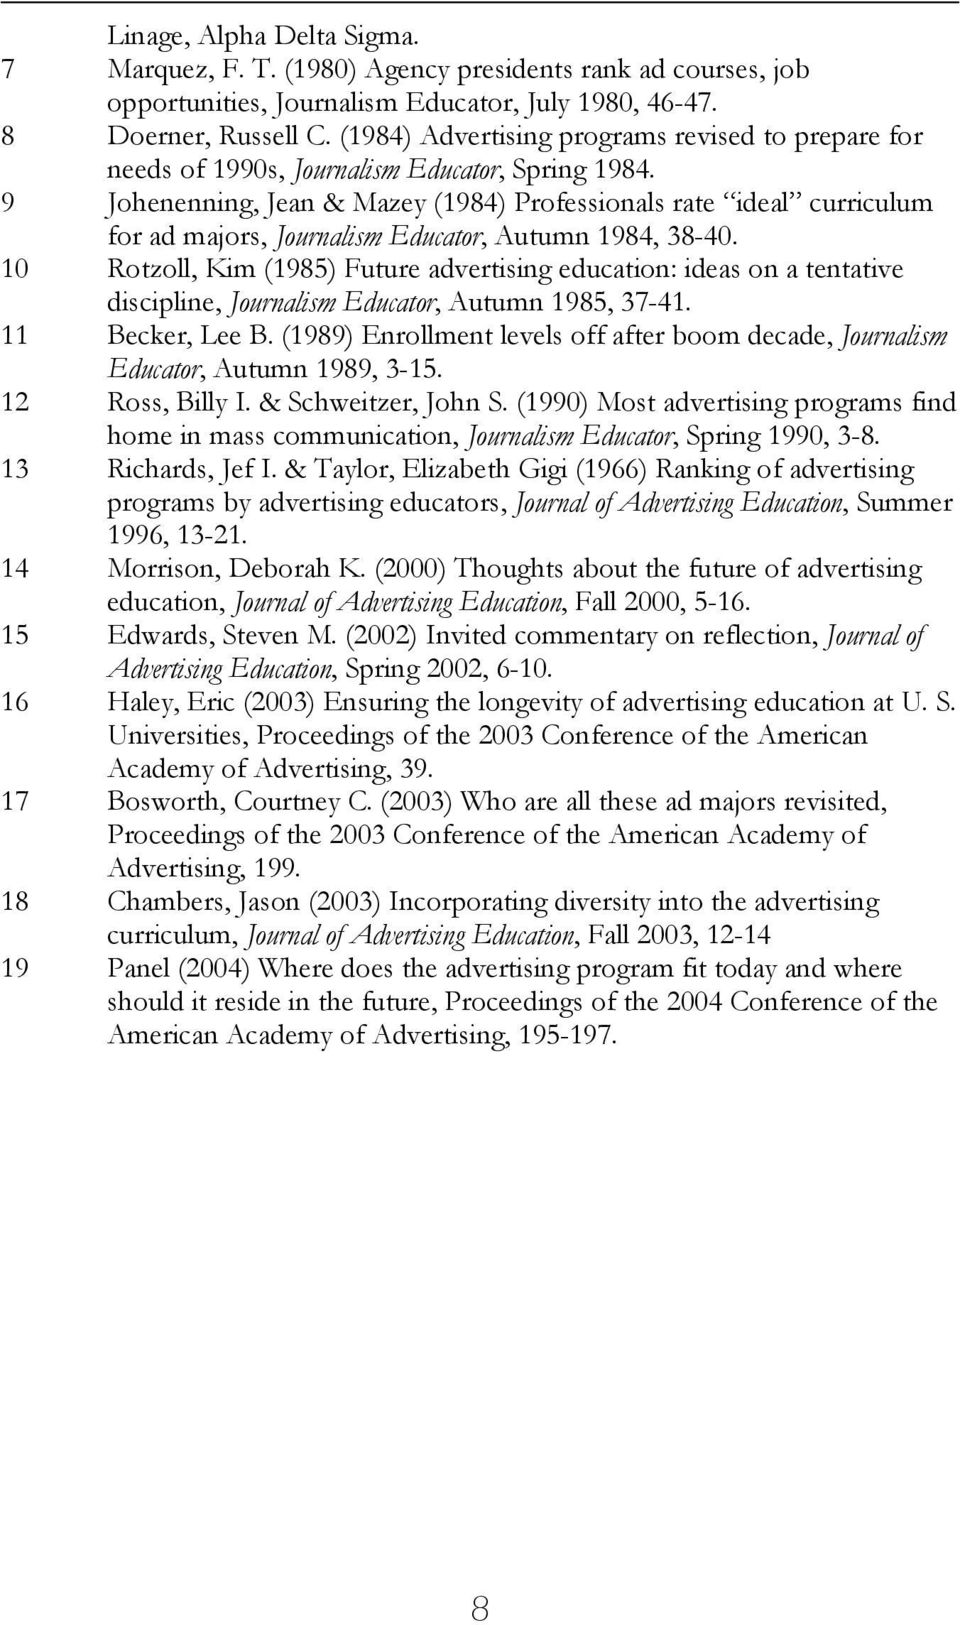 9 Johenenning, Jean & Mazey (1984) Professionals rate ideal curriculum for ad majors, Journalism Educator, Autumn 1984, 38-40.